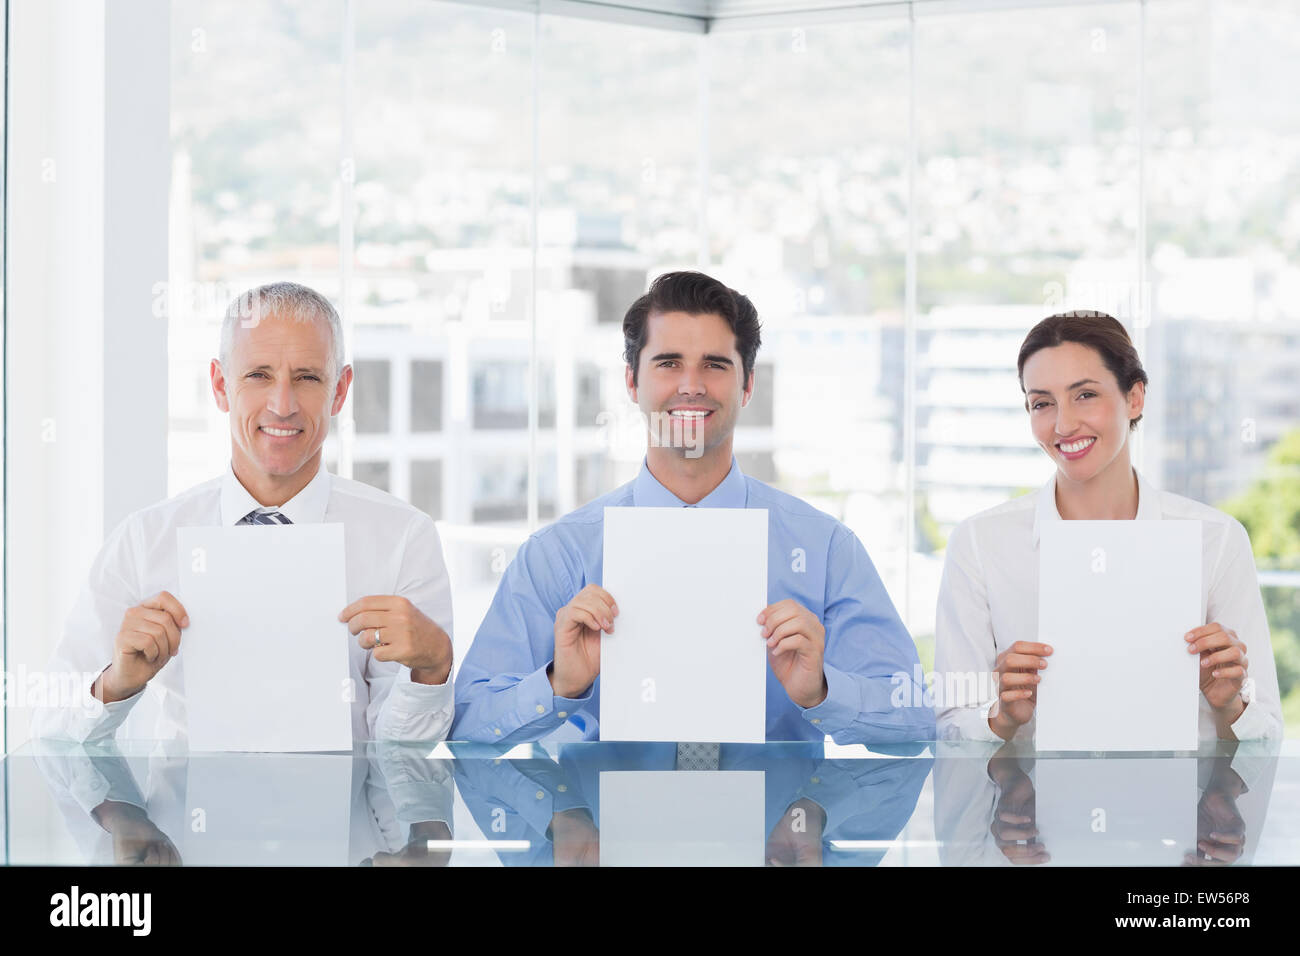 Smiling business team showing paper Stock Photo